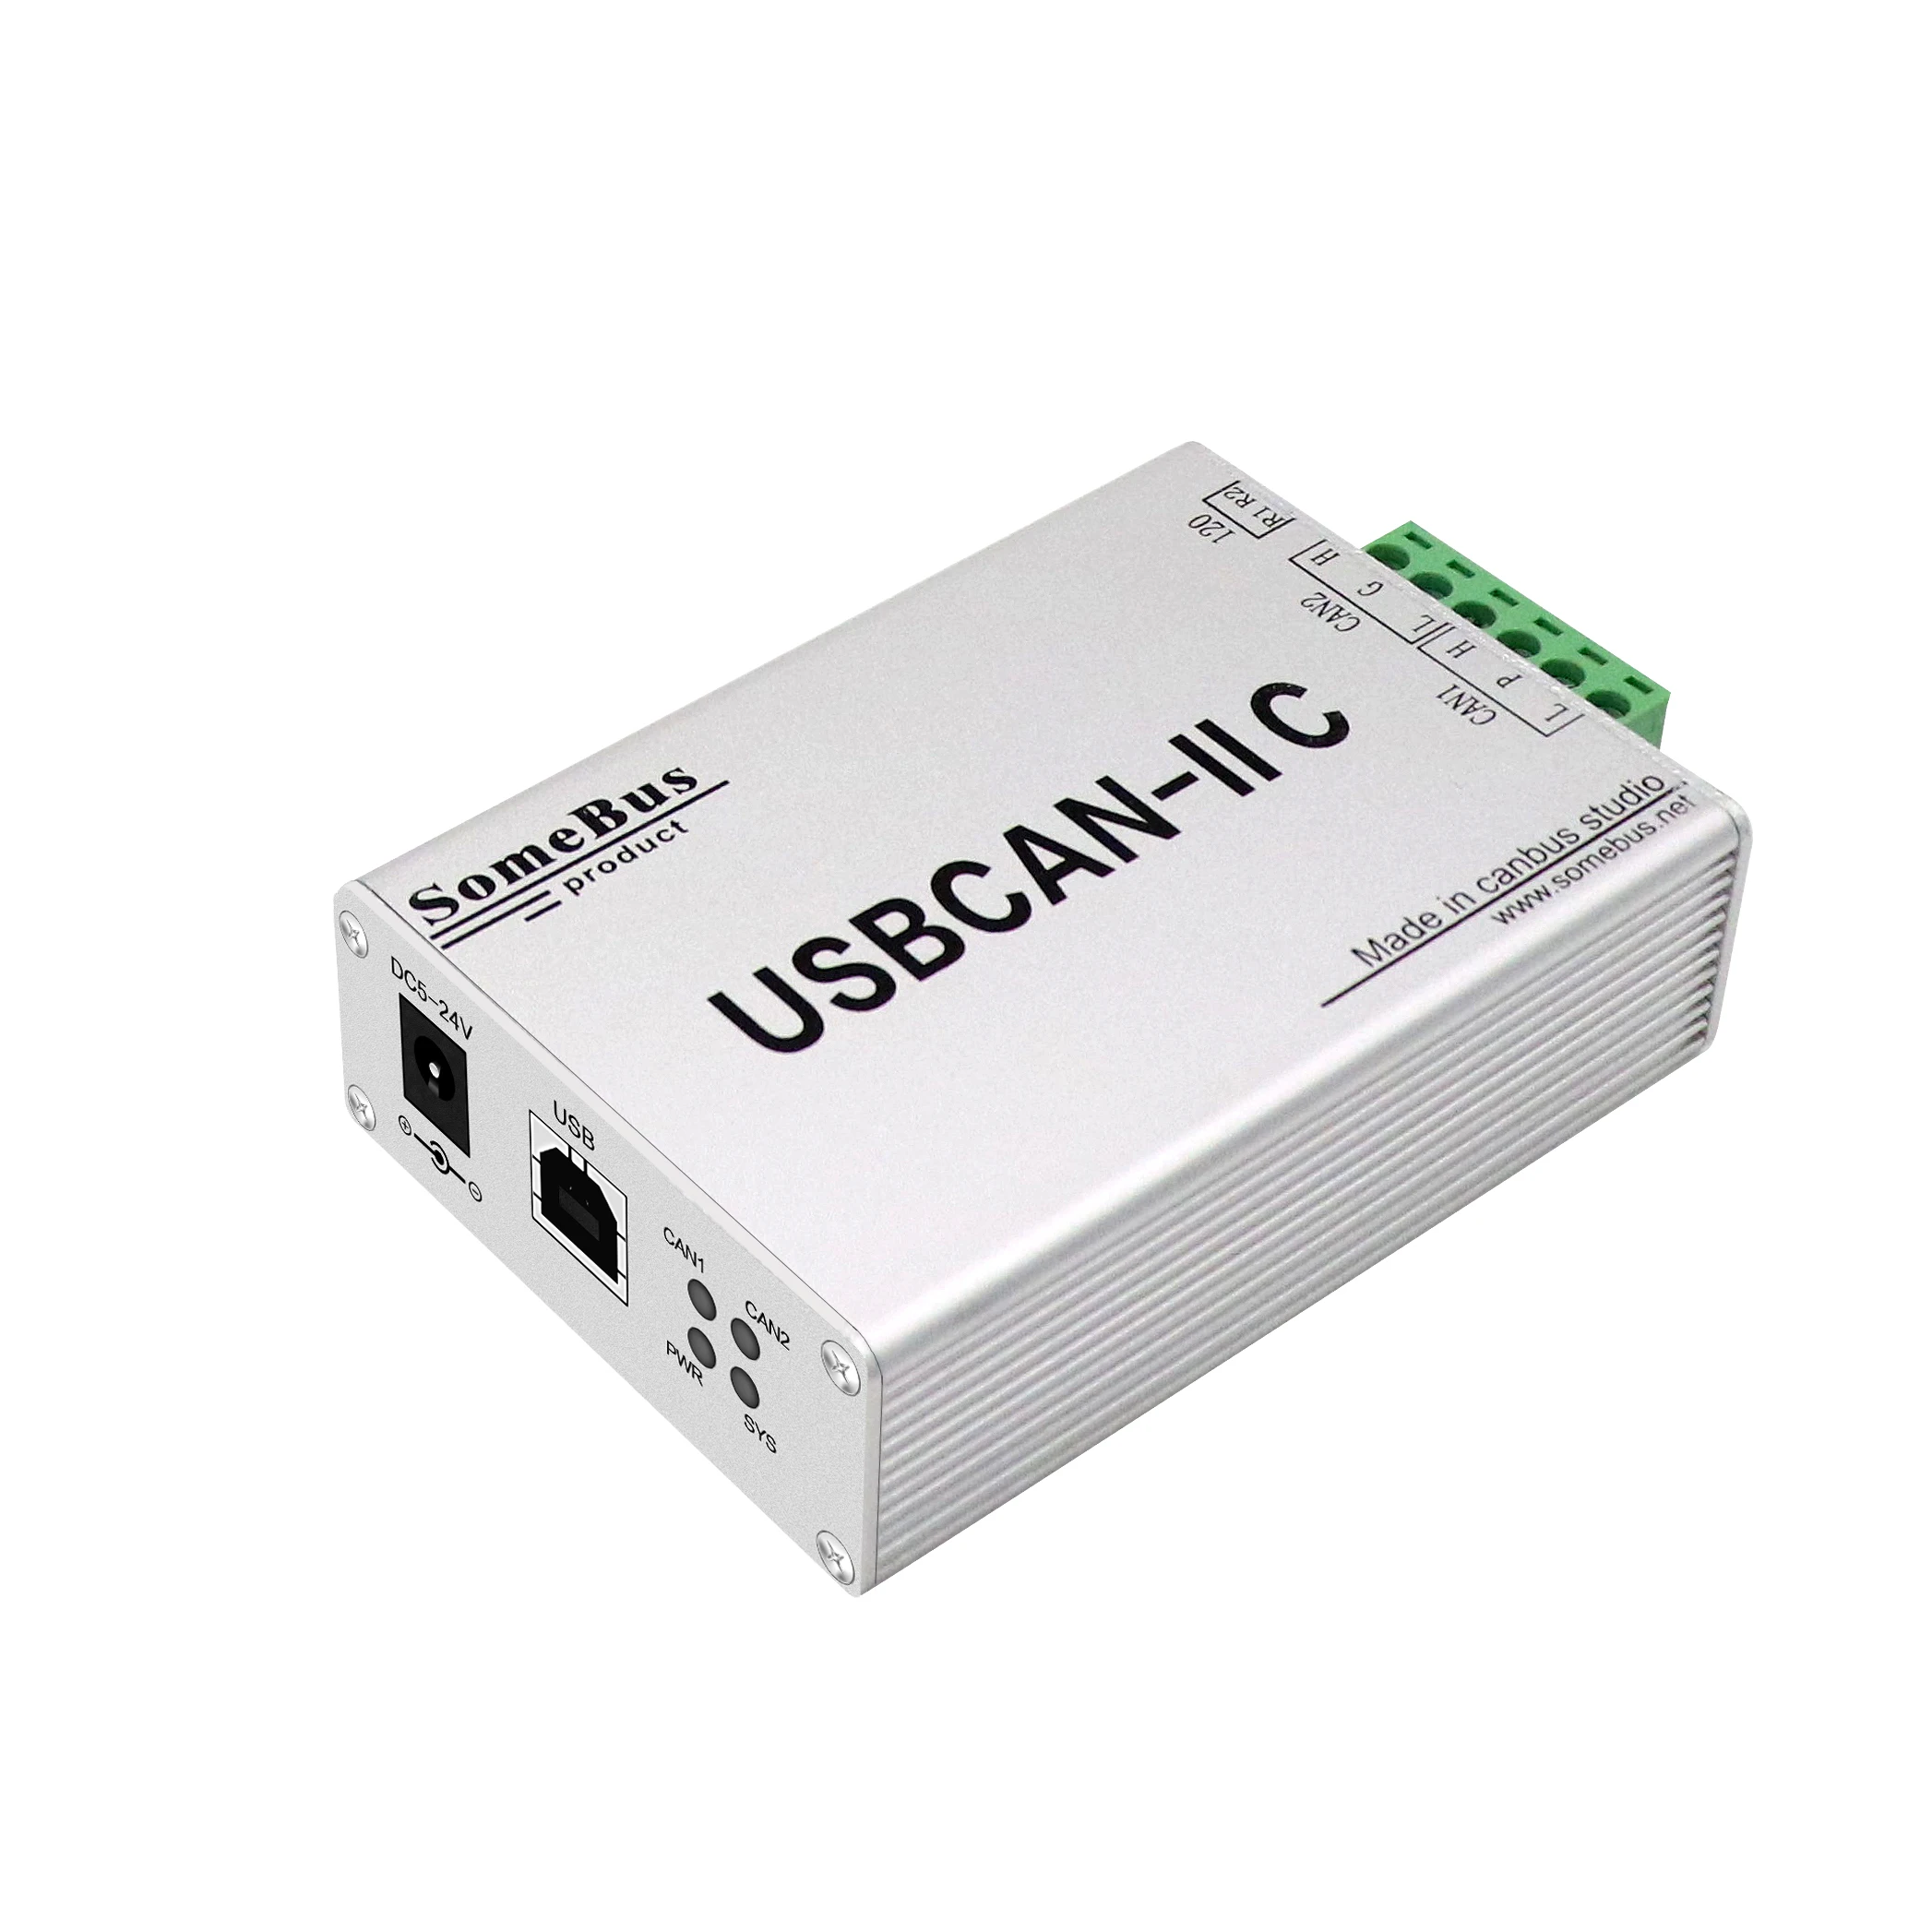 Industrial CAN-bus Communication Interface Card for CAN Bus Network Diagnosis And Testing